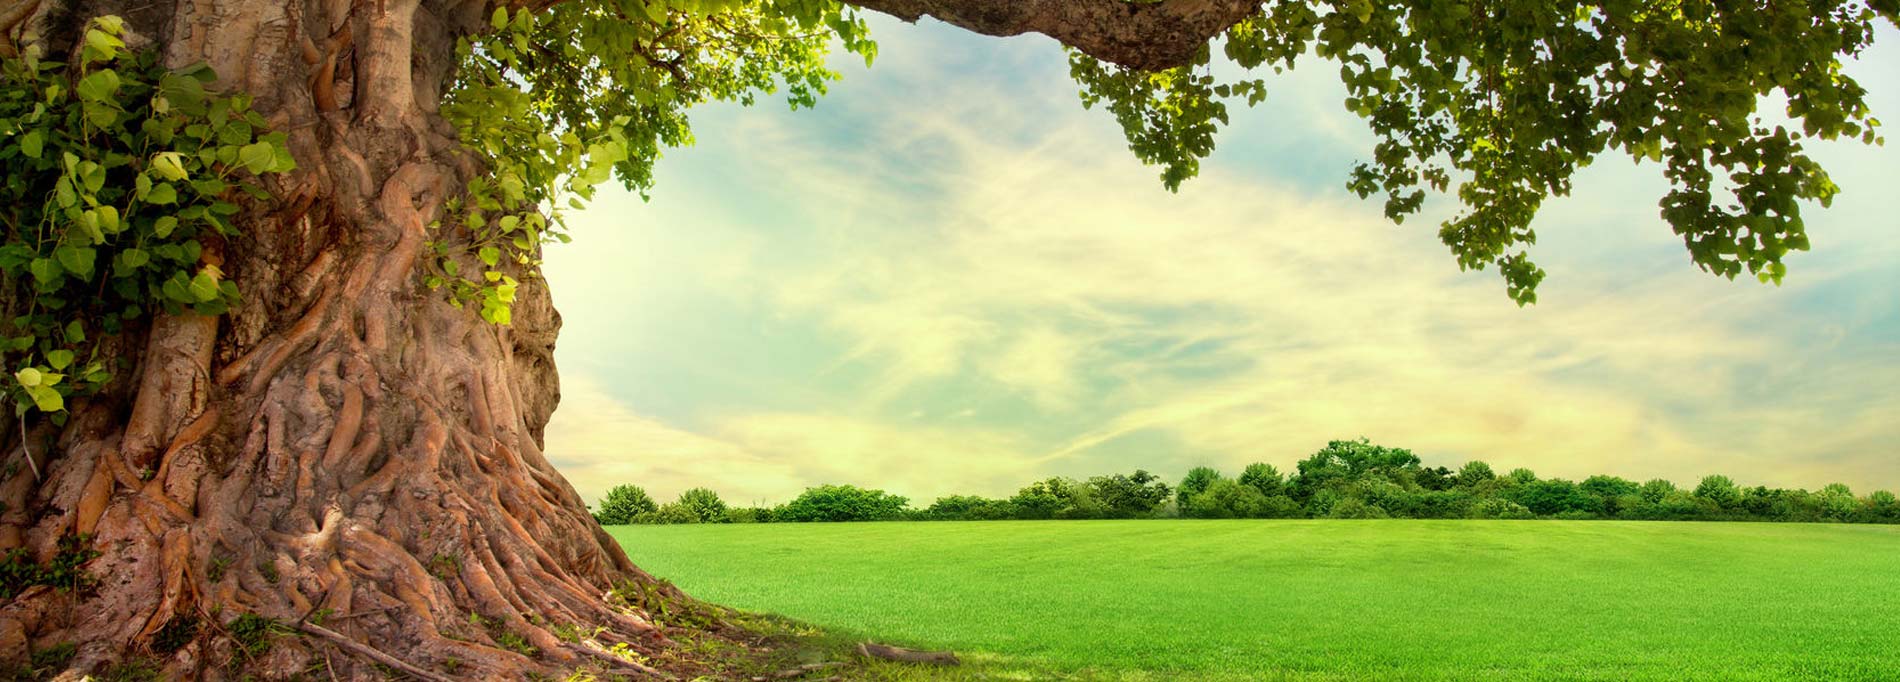 Picture of large tree and background field